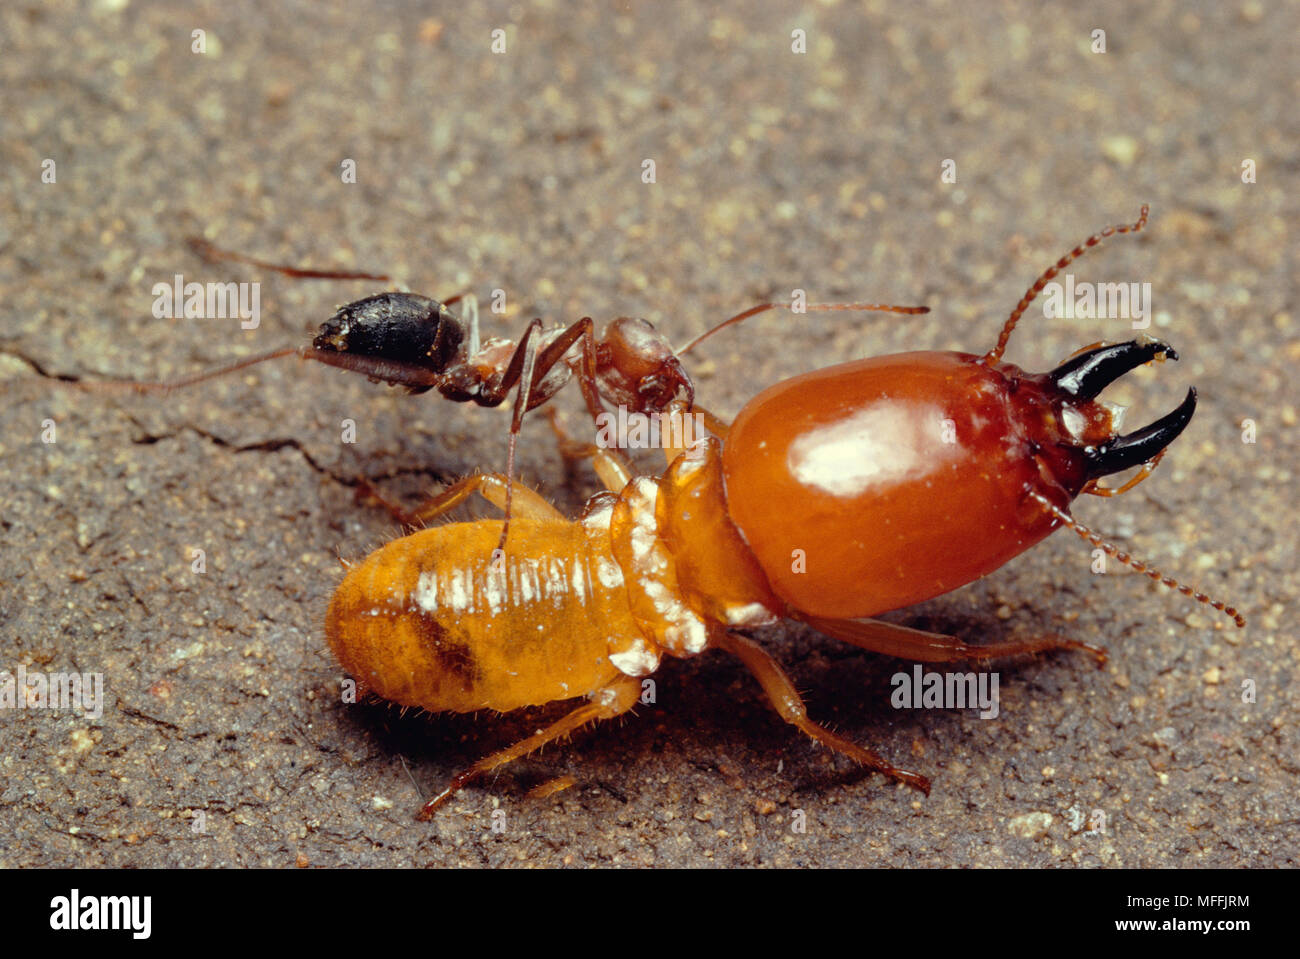 PUGNACIOUS ANT Anoplolepis custodies attacking Termite Soldier   Macrotermes bellicosus     South Africa Stock Photo